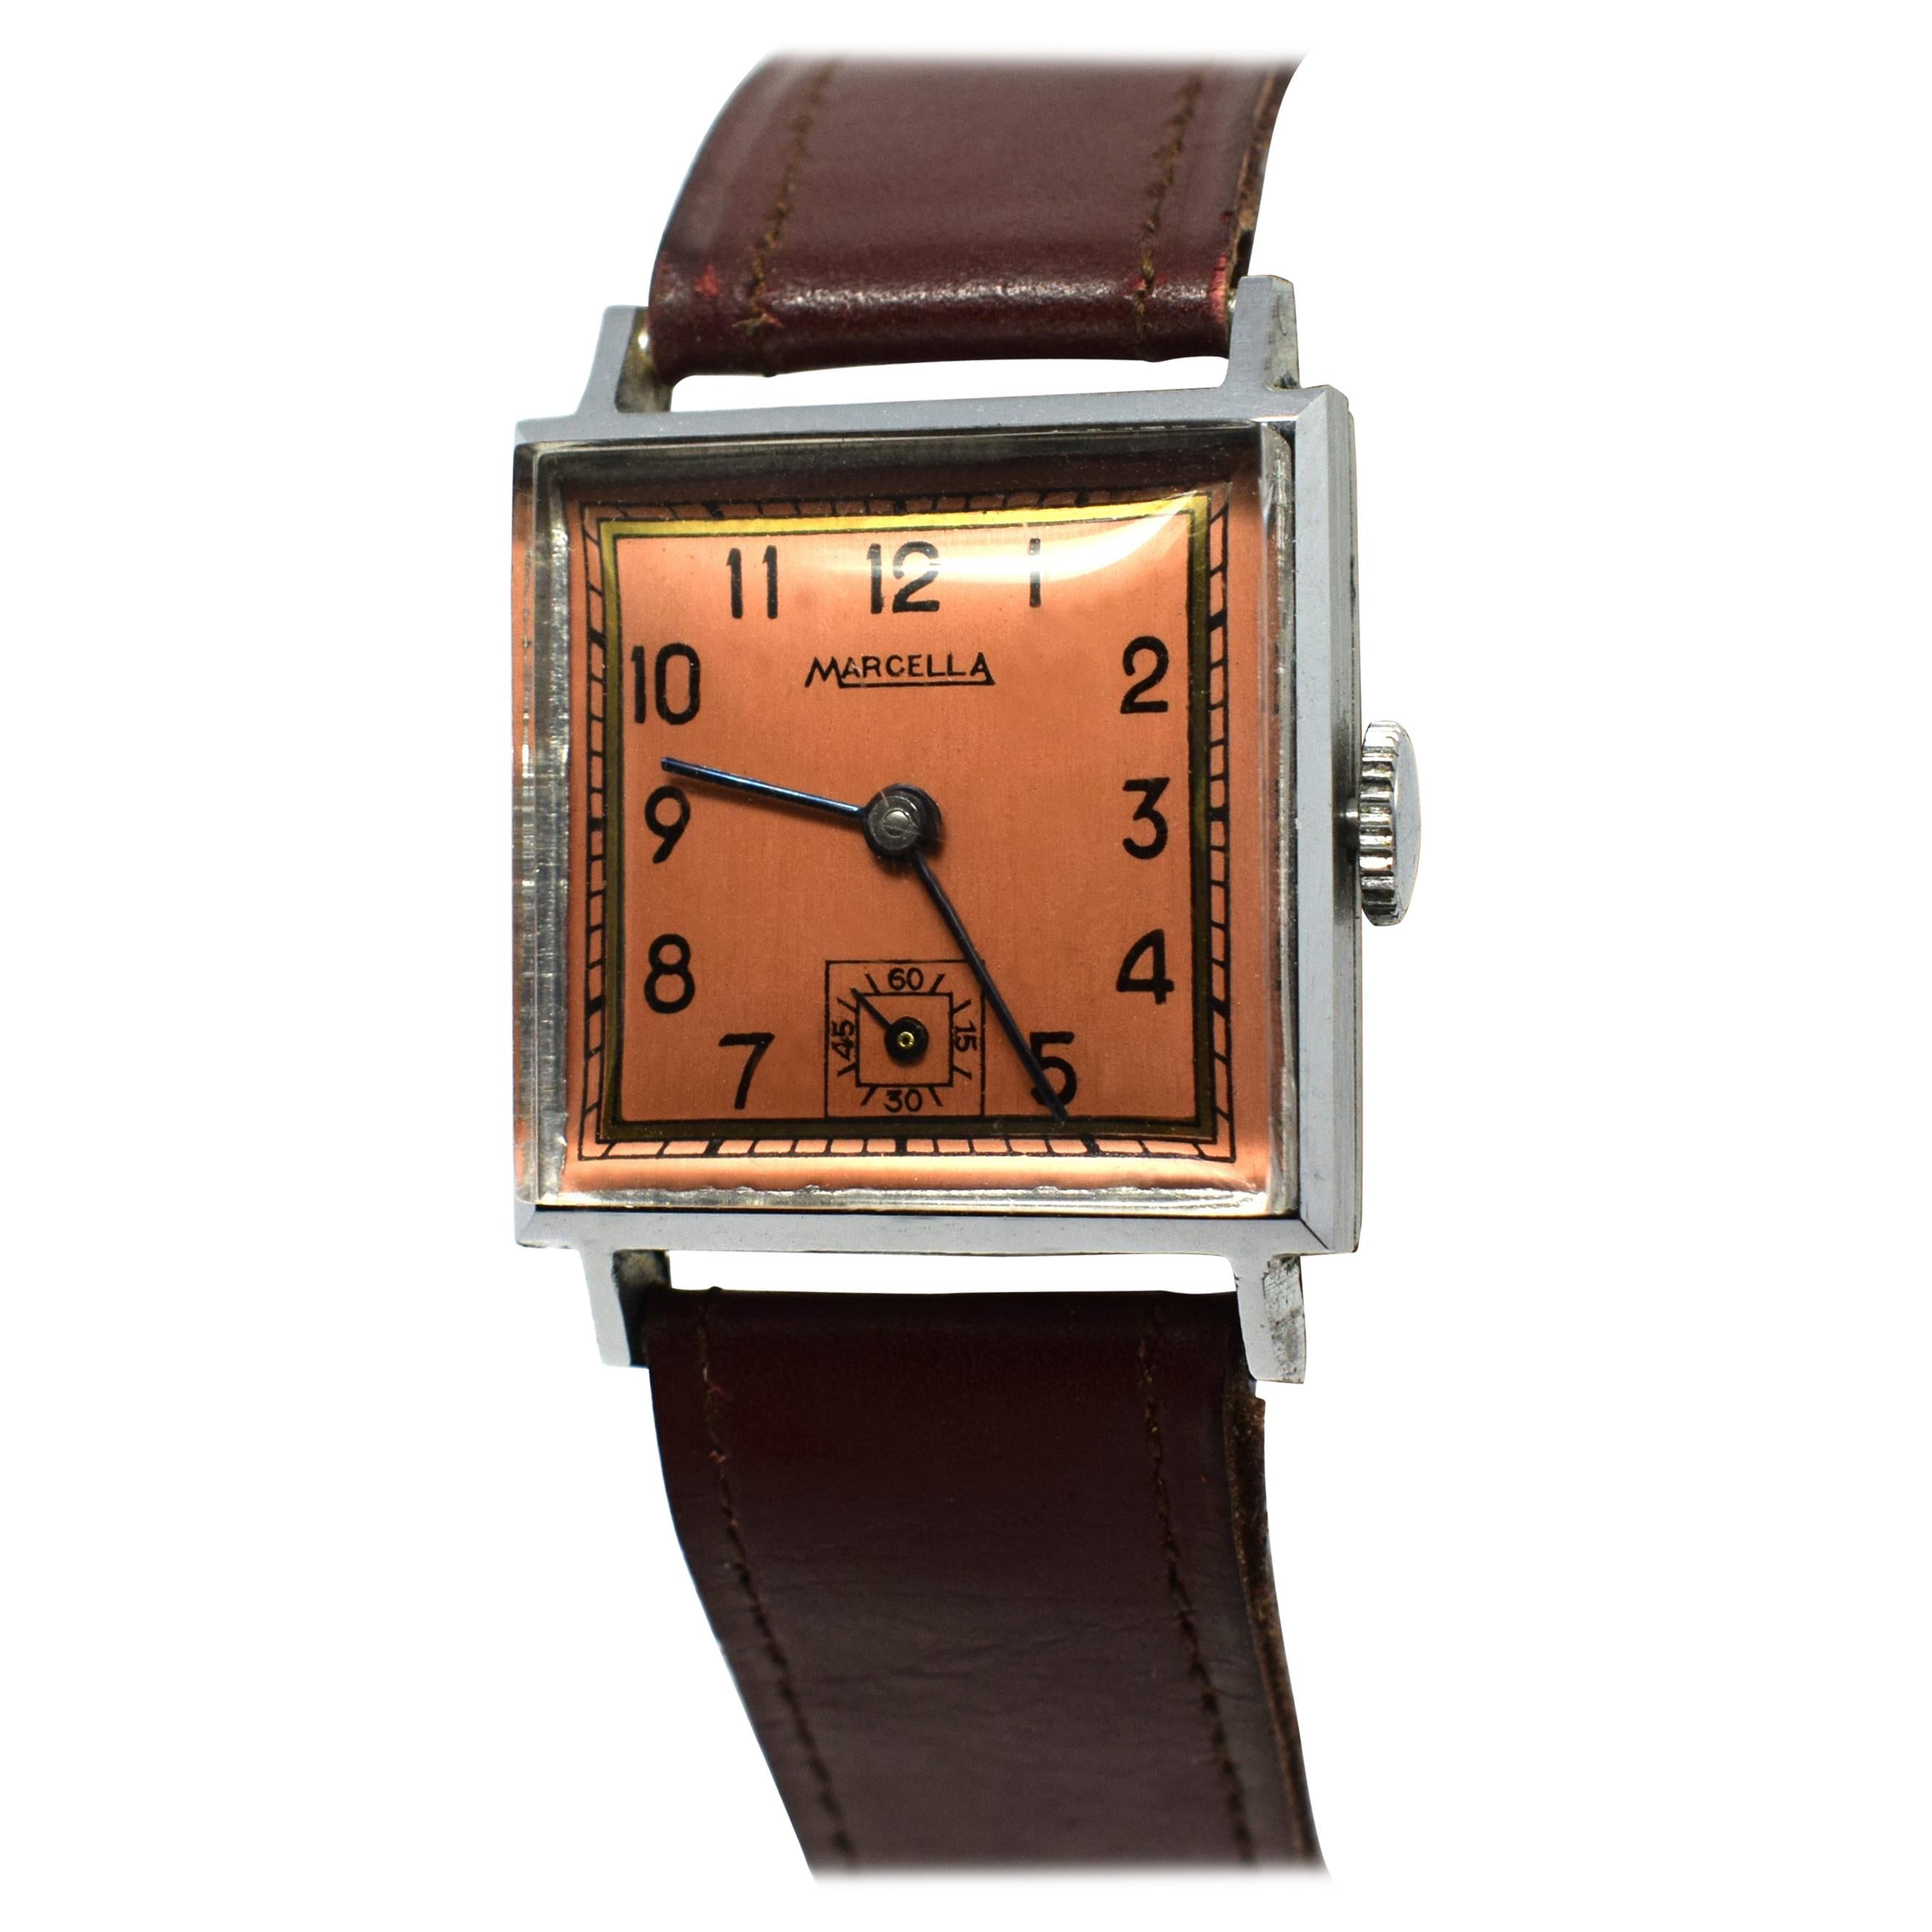 Never Used Art Deco Gents Wristwatch, 1930s, Marcella